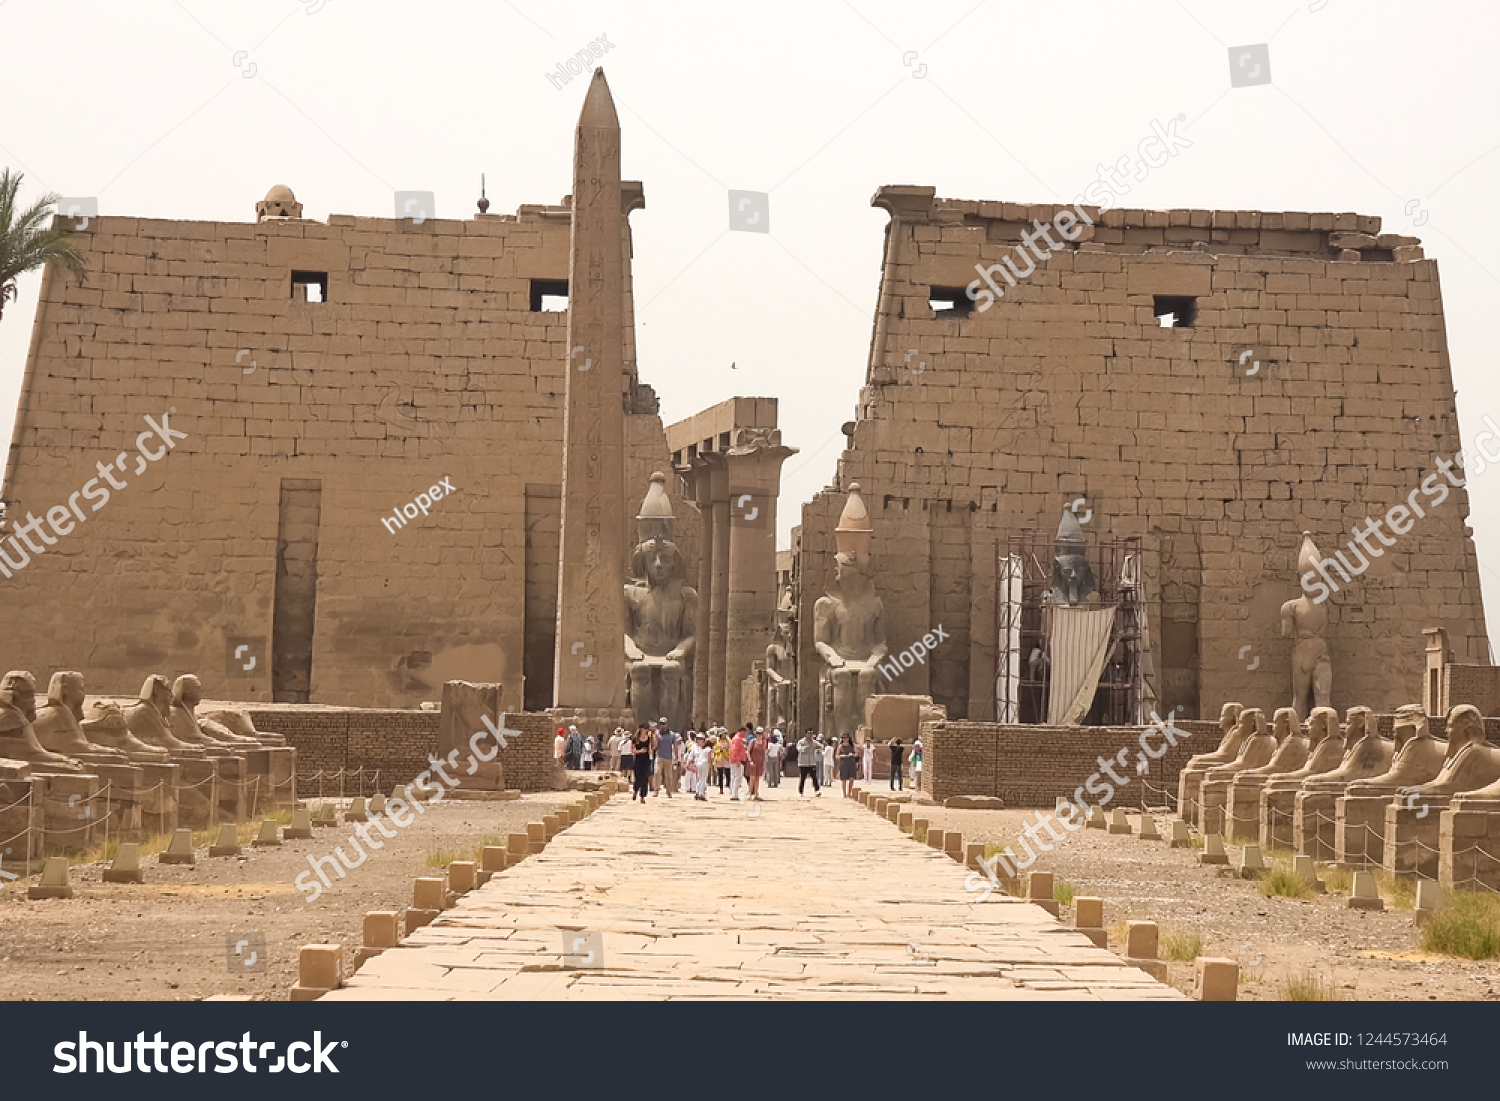 Buildings and columns of ancient Egyptian megaliths. Ancient ruins of Egyptian buildings #1244573464